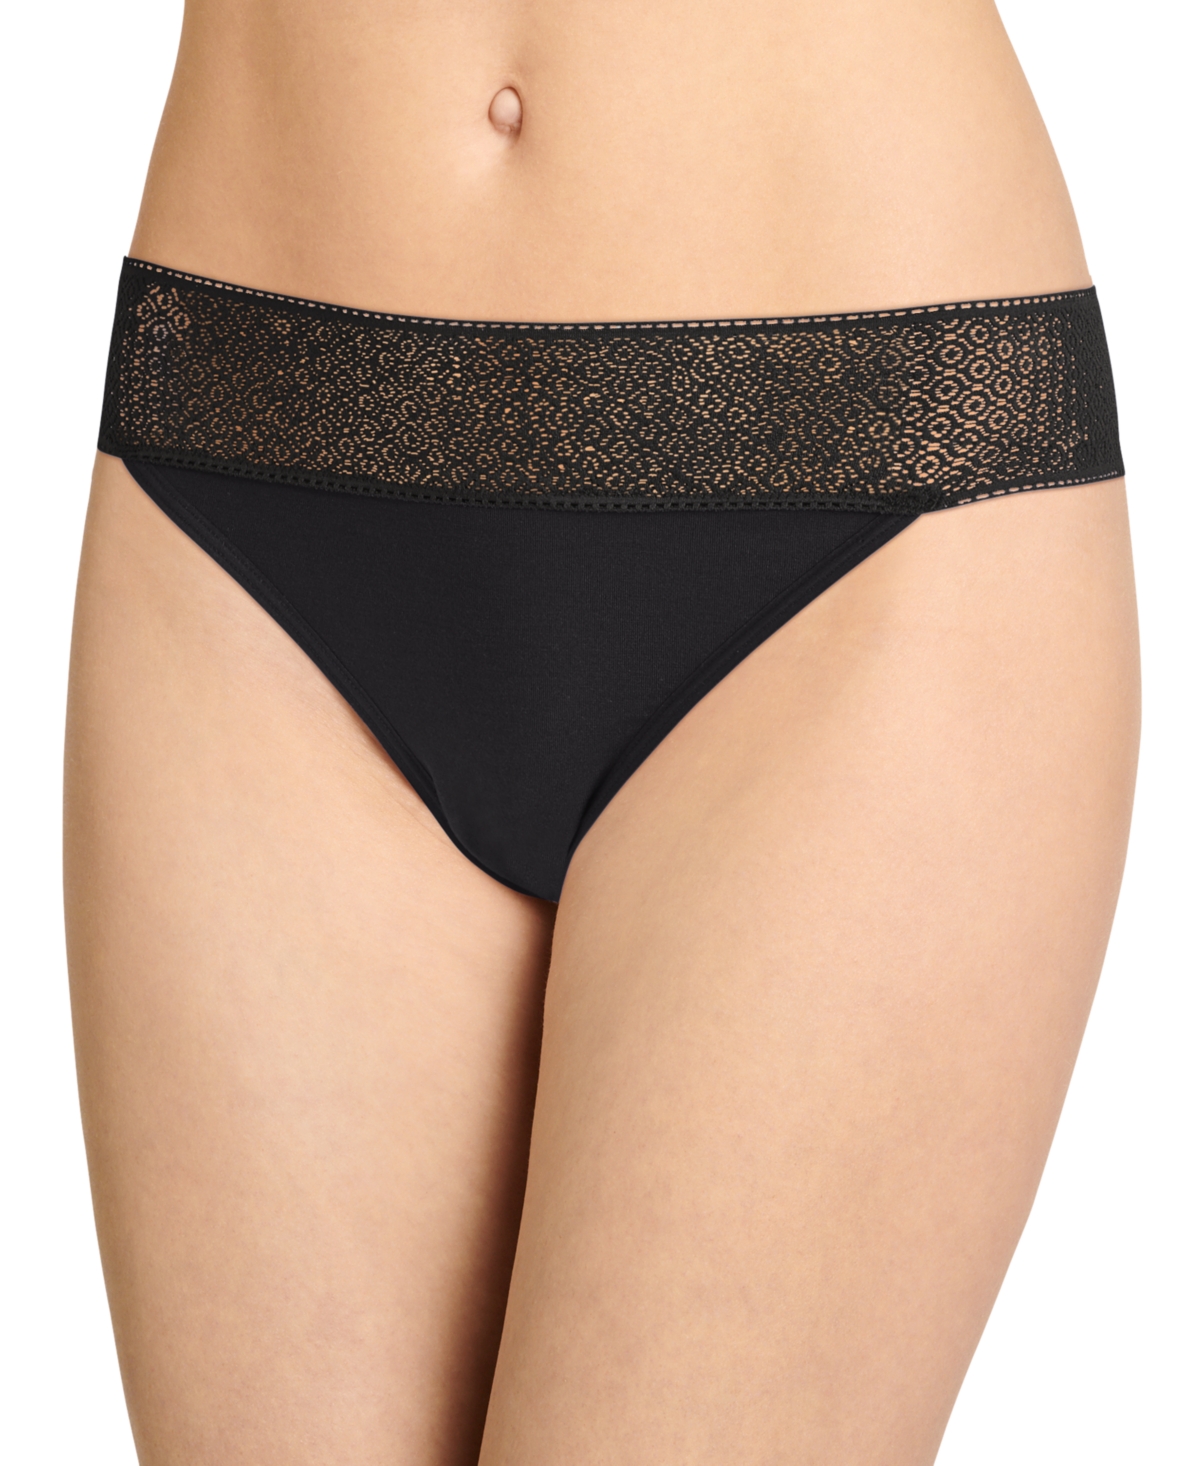 Women's Soft Touch Lace Thong Underwear - Just Past Midnight